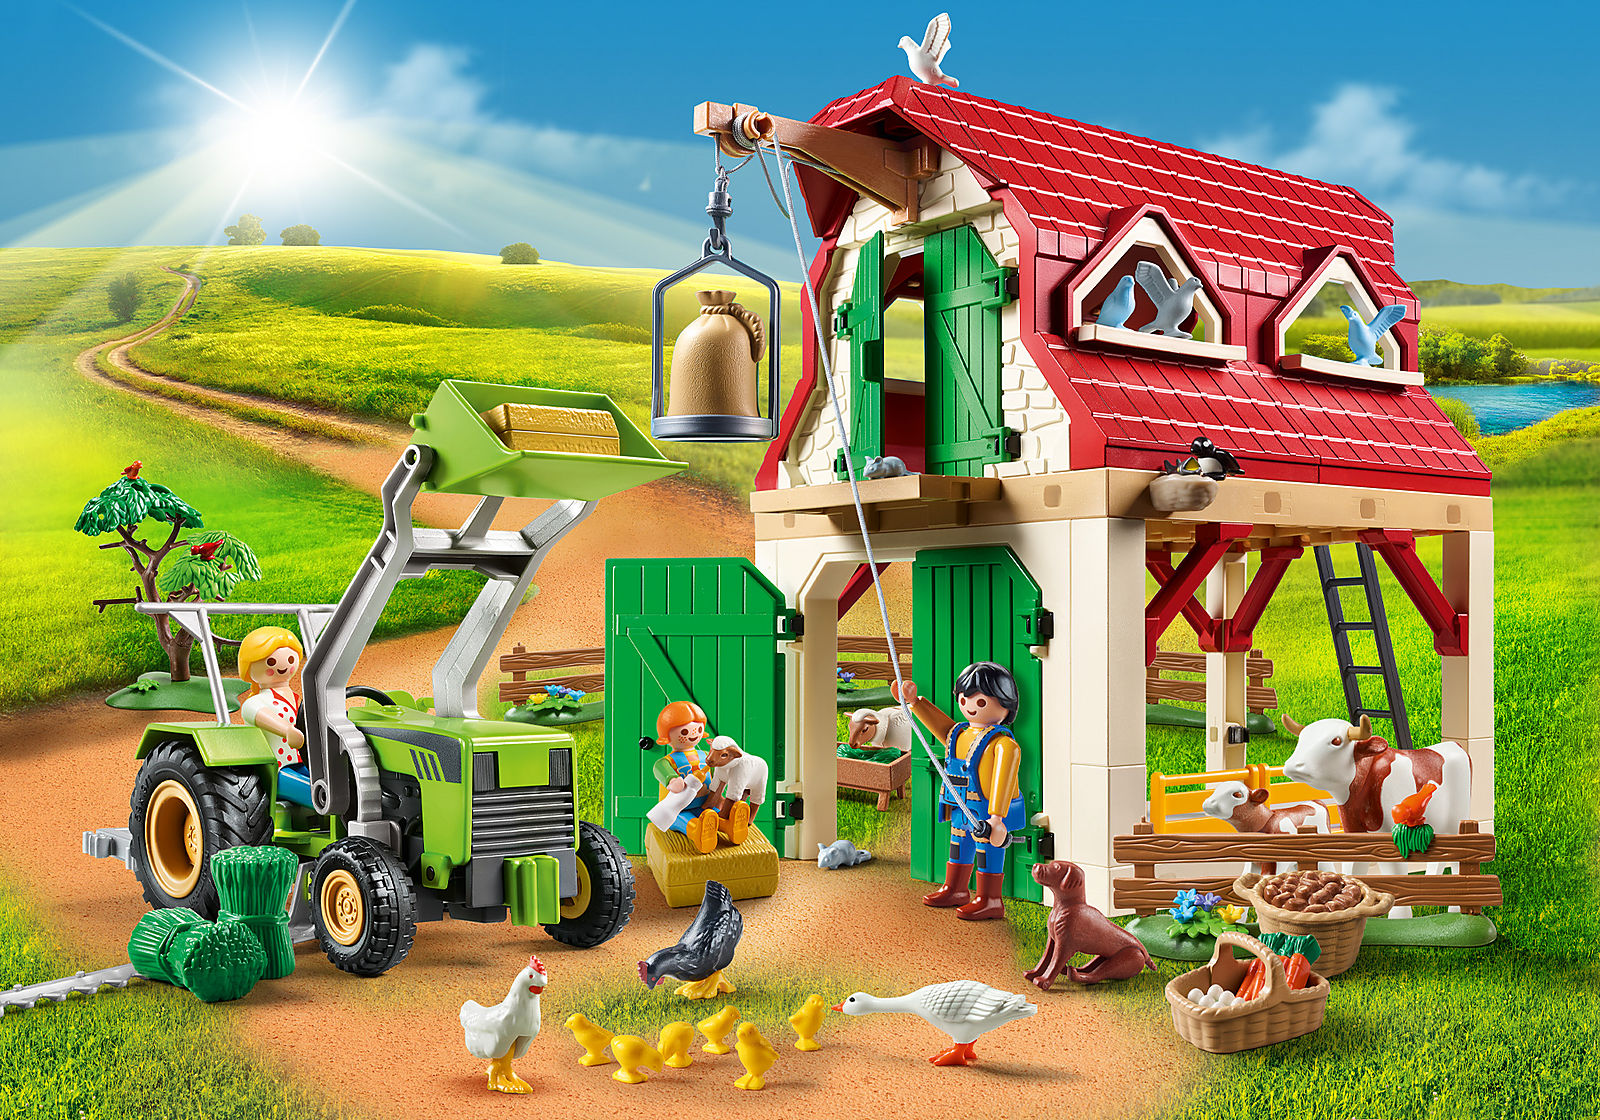  Playmobil Large Tractor with Accessories : Toys & Games